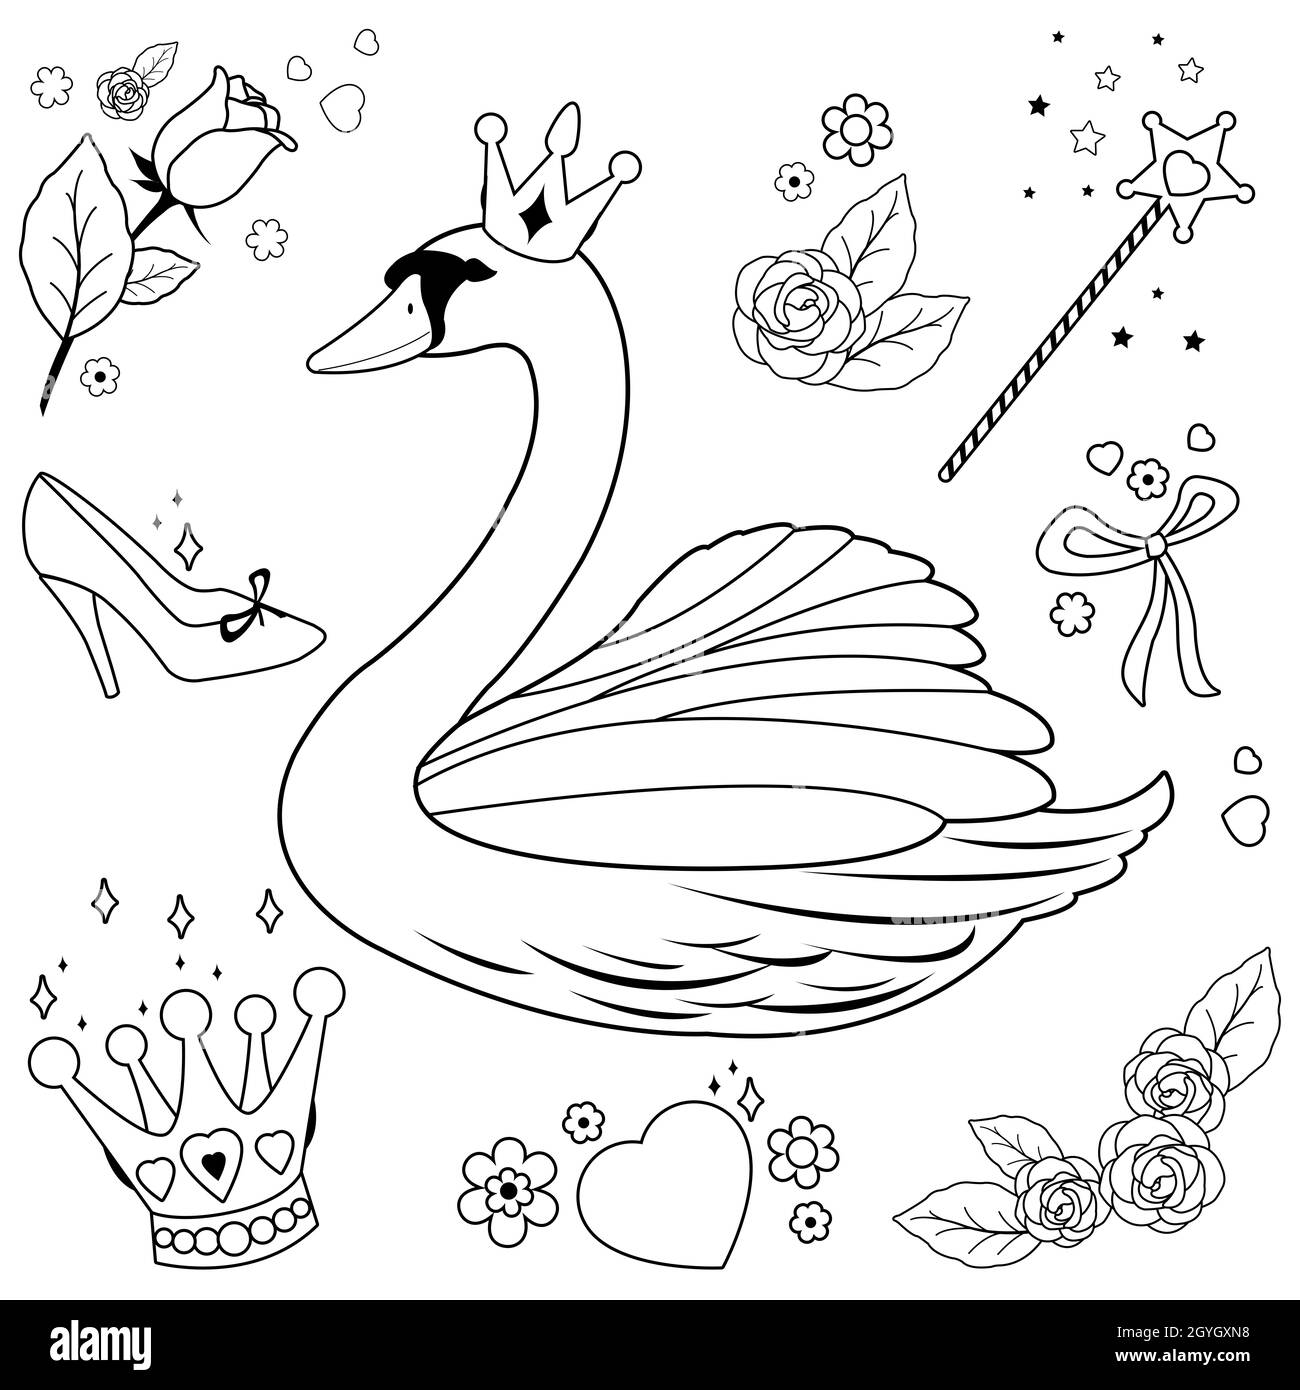 Swan princess fairy tale set. Black and white coloring page Stock ...